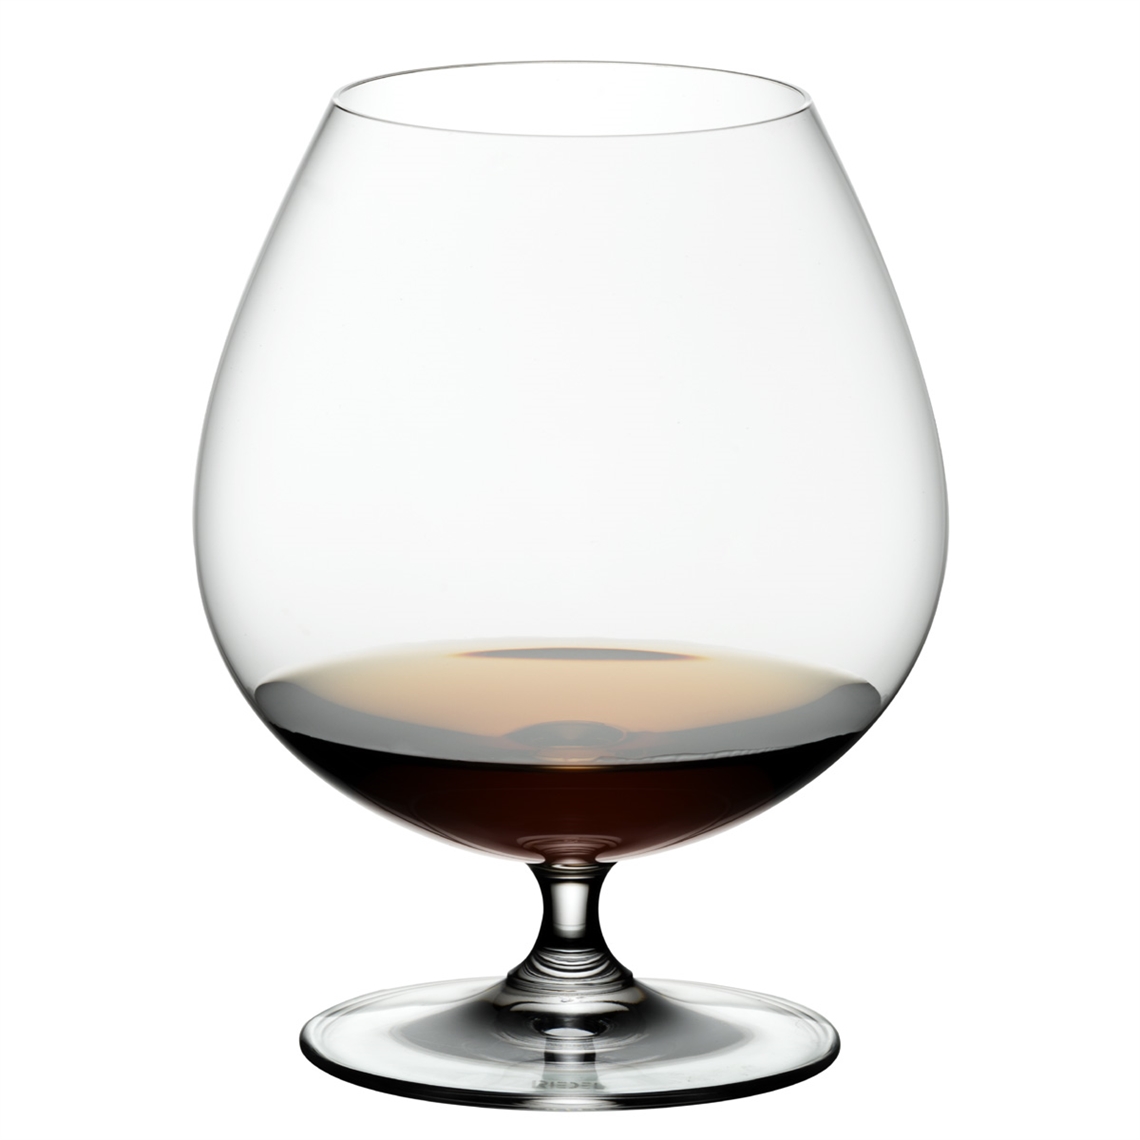 View more mondial from our Spirit Glasses range